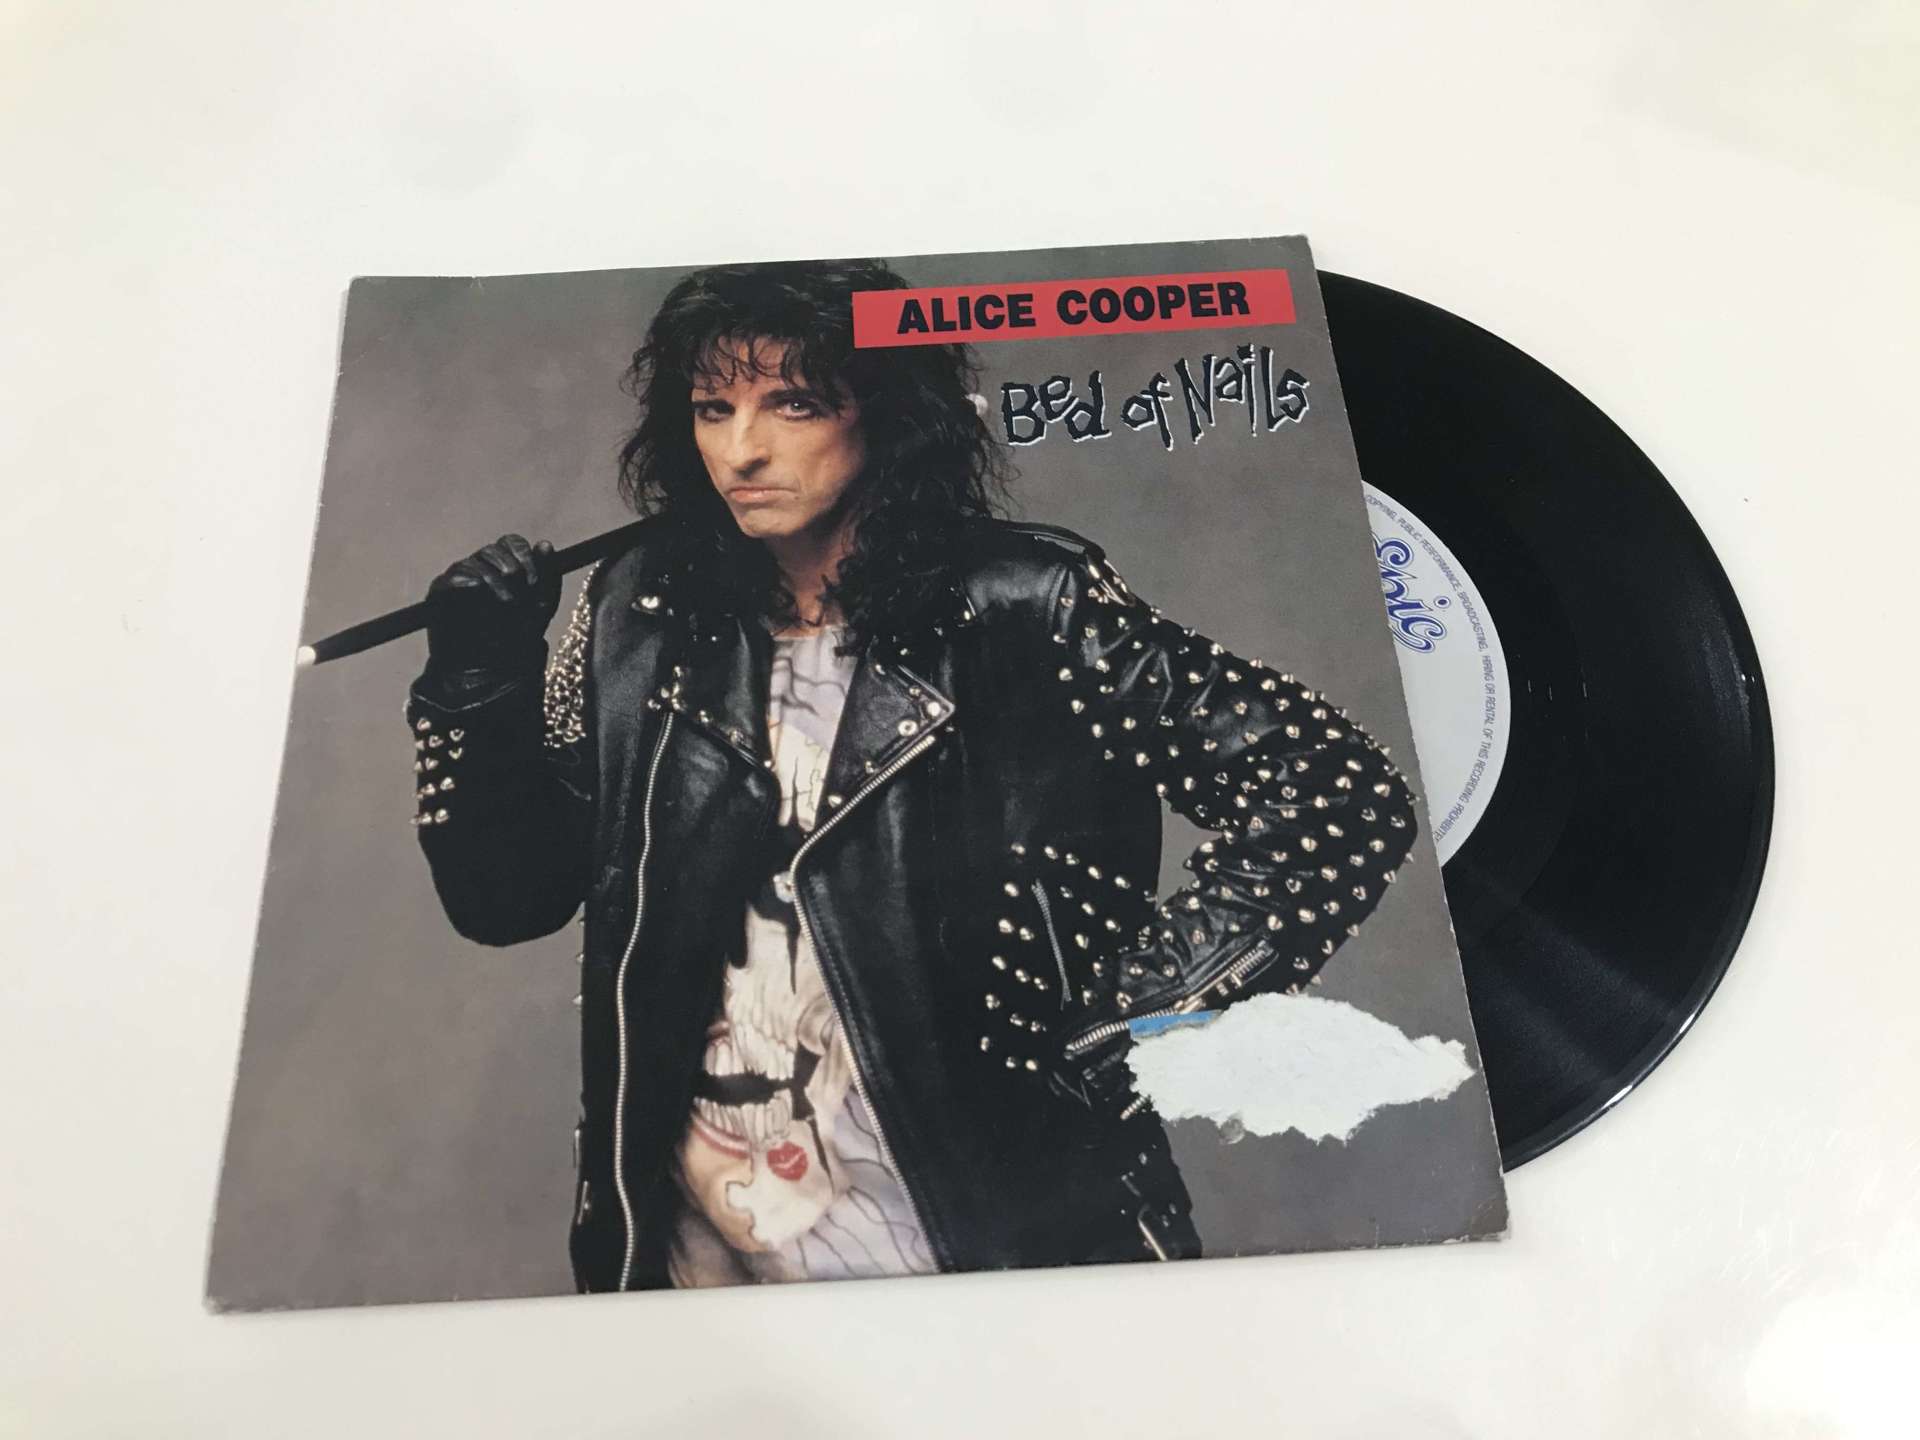 Alice Cooper - Bed of Nails (Countdown, 1989) - YouTube